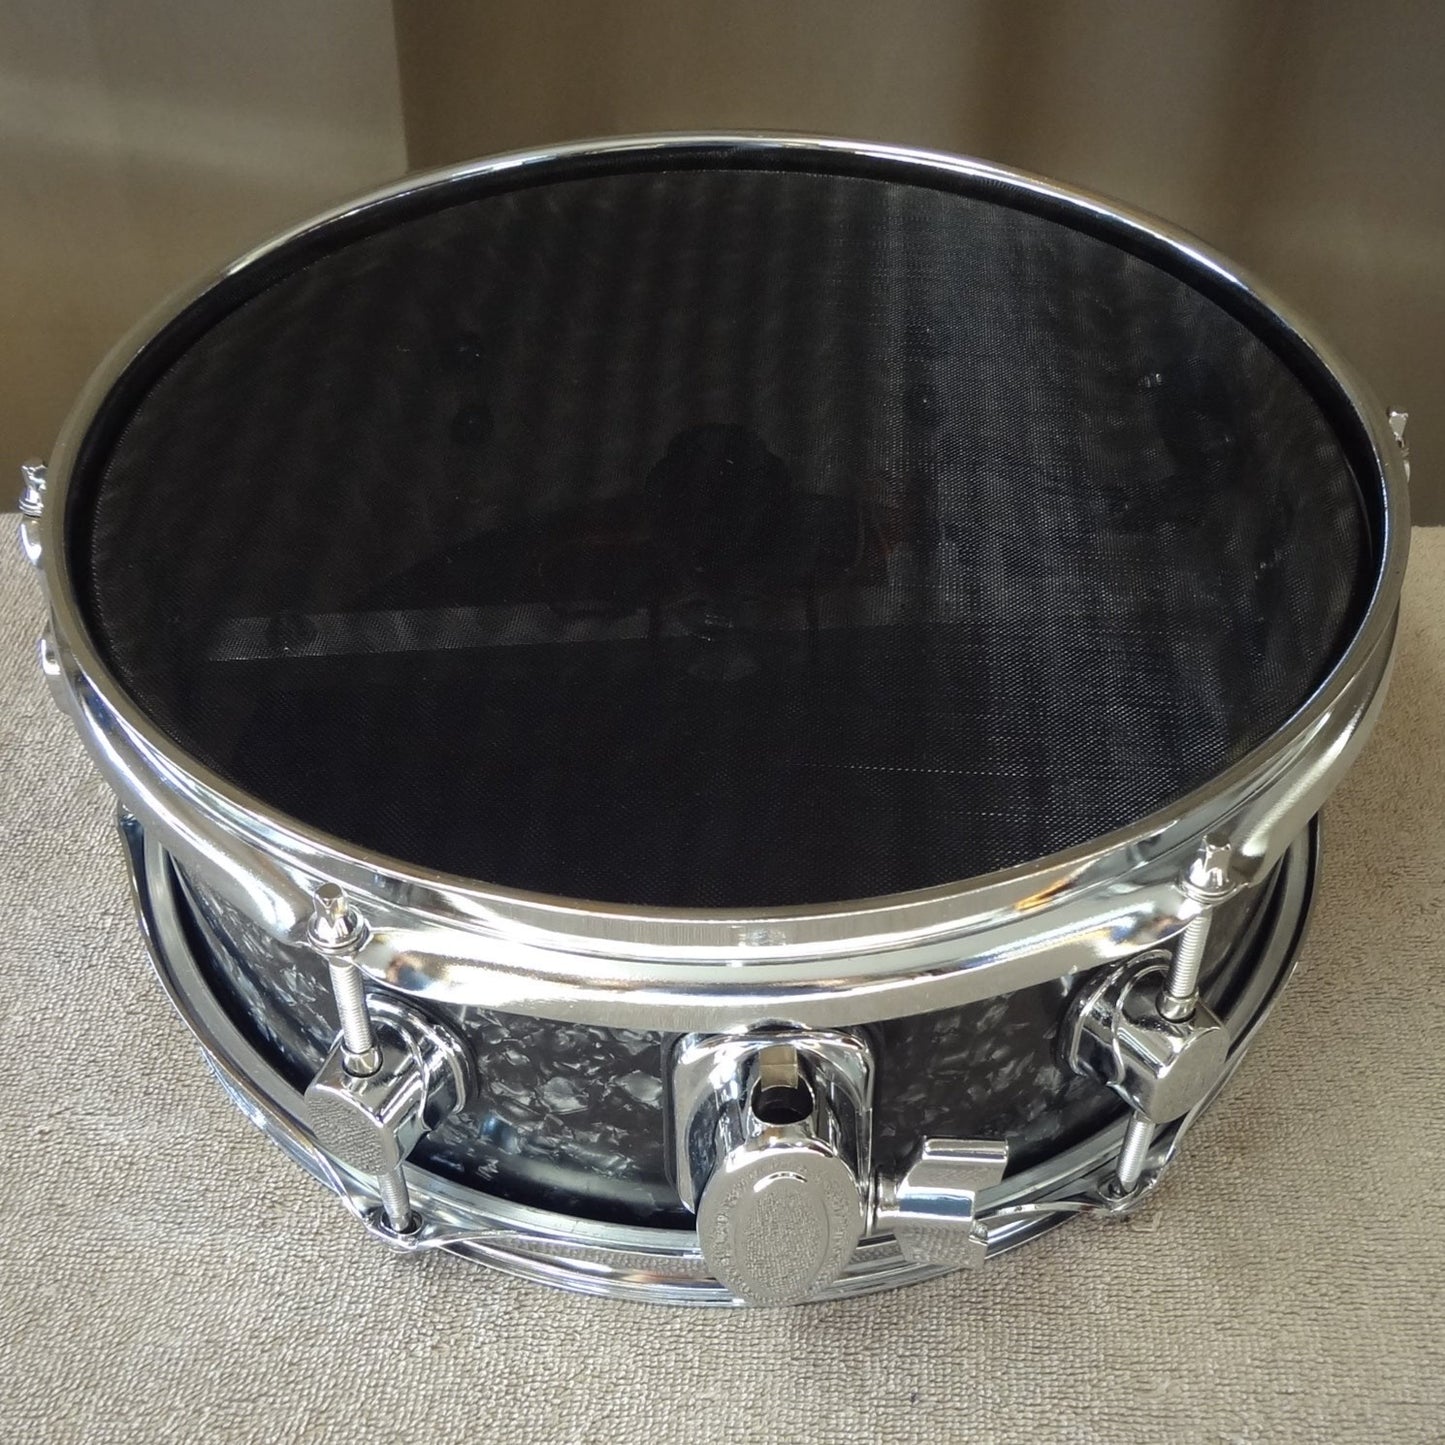 New 12 Inch Custom Electronic Snare Drum - Black Pearl